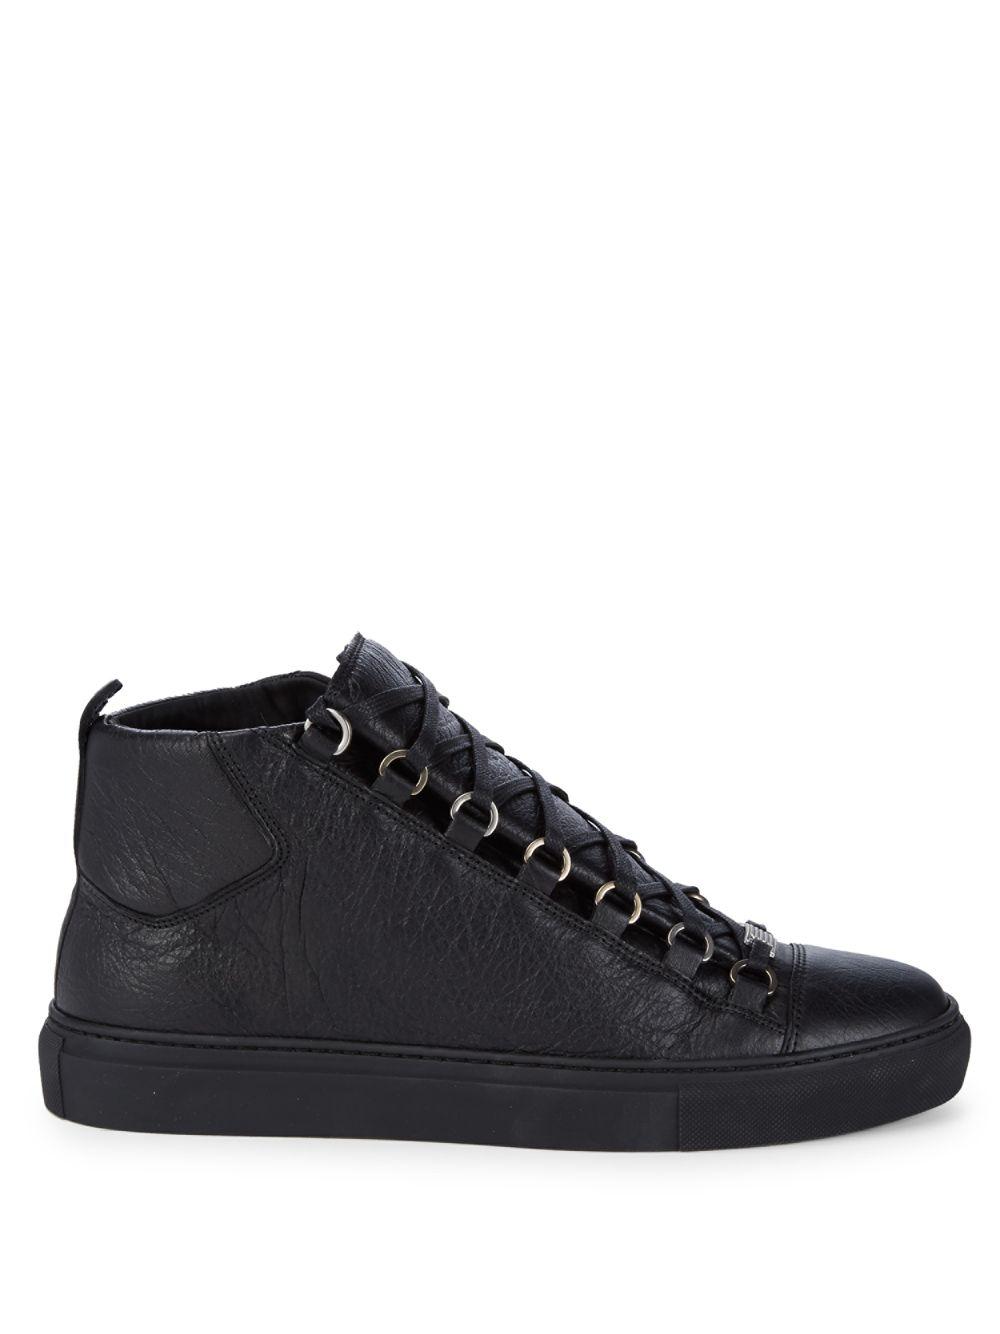 Balenciaga Leather Arena Water Snake High-top Trainers in Black for Men ...